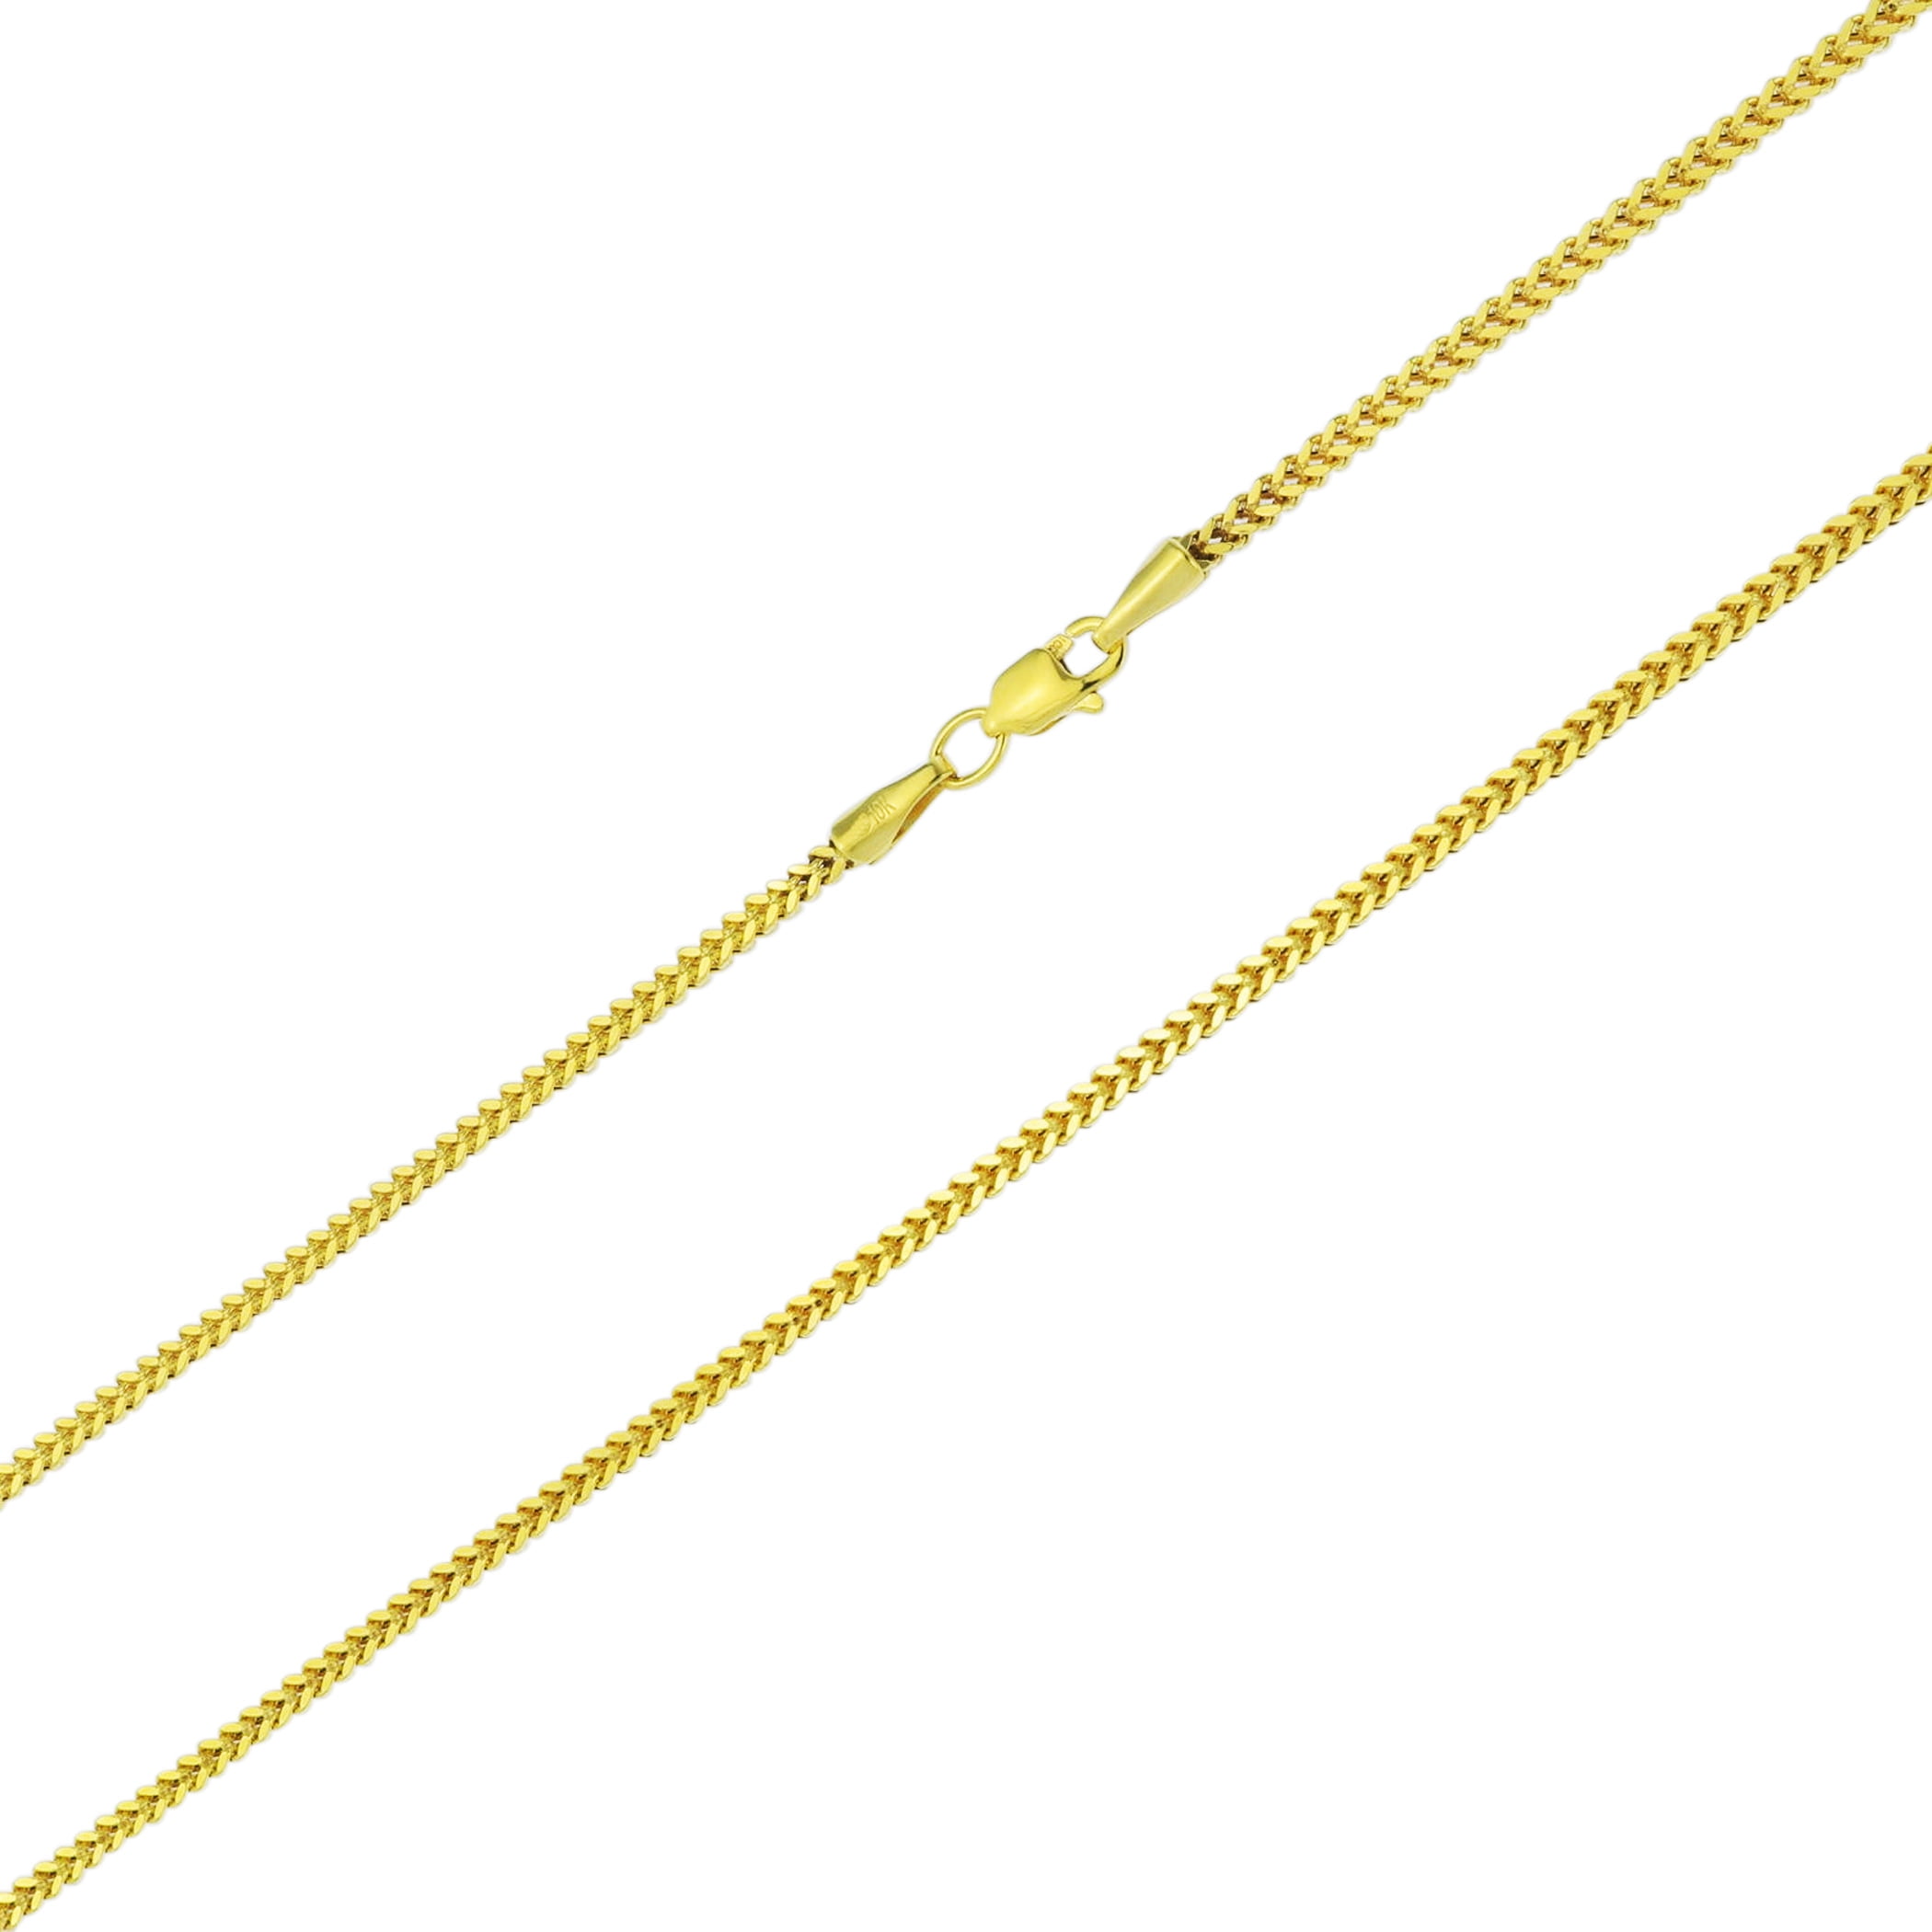 14K Solid Yellow Gold Franco Necklace Chain 1.2mm 16-30" Polish Link Women Men